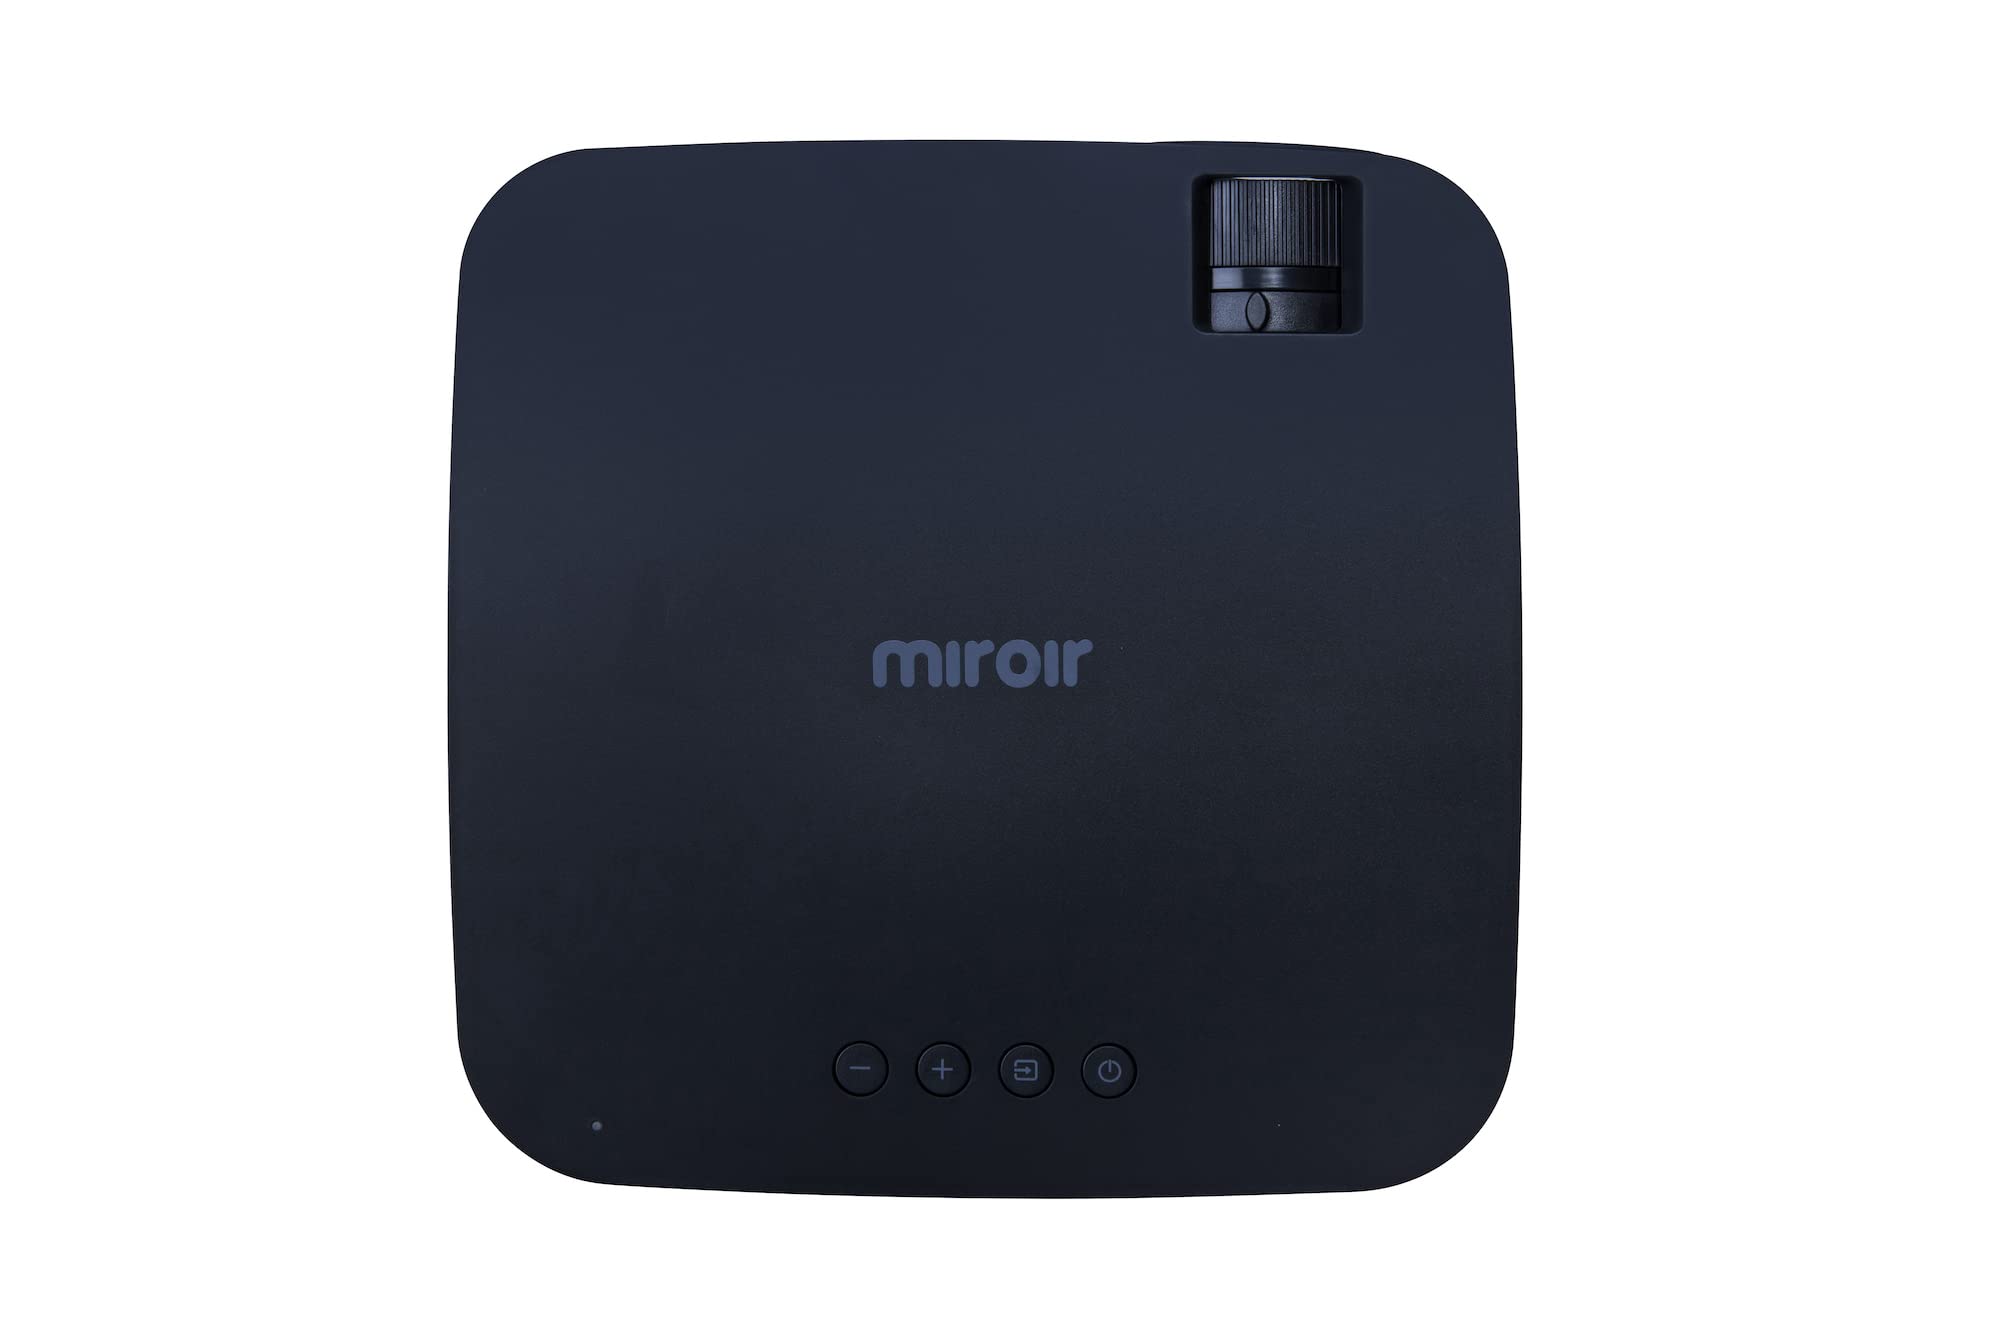 Miroir L300 1080p (Native Resolution) Full HD LCD Portable Projector, Built-in Speaker, LED Lamp, 2x HDMI